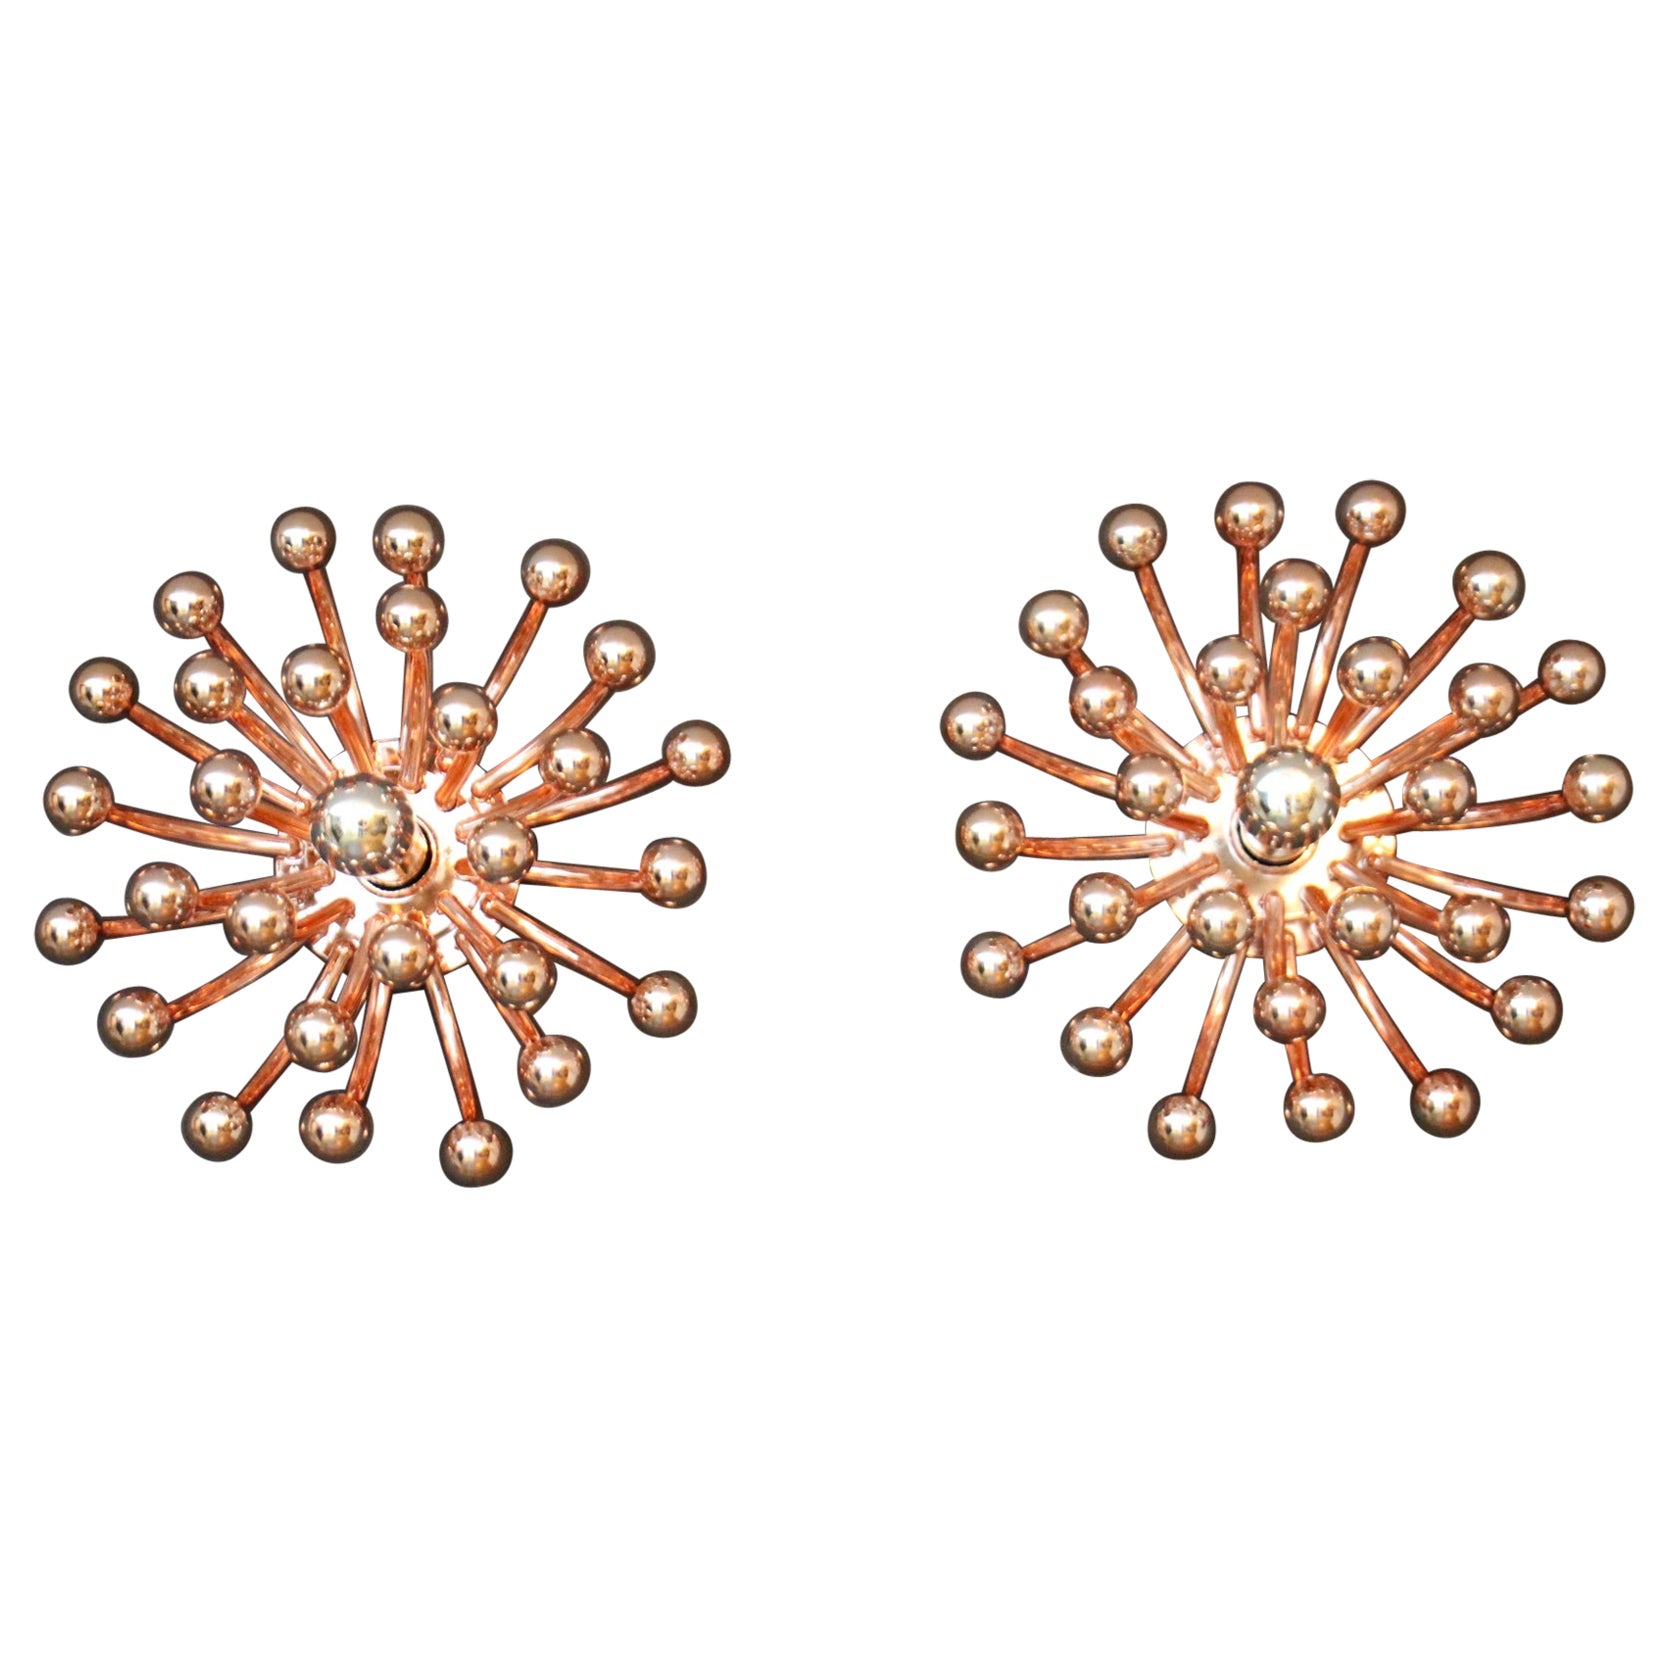 31 cm Pink Gold Pistillo Chandeliers Table Lamps or Wall Lamps By Valenti Milano